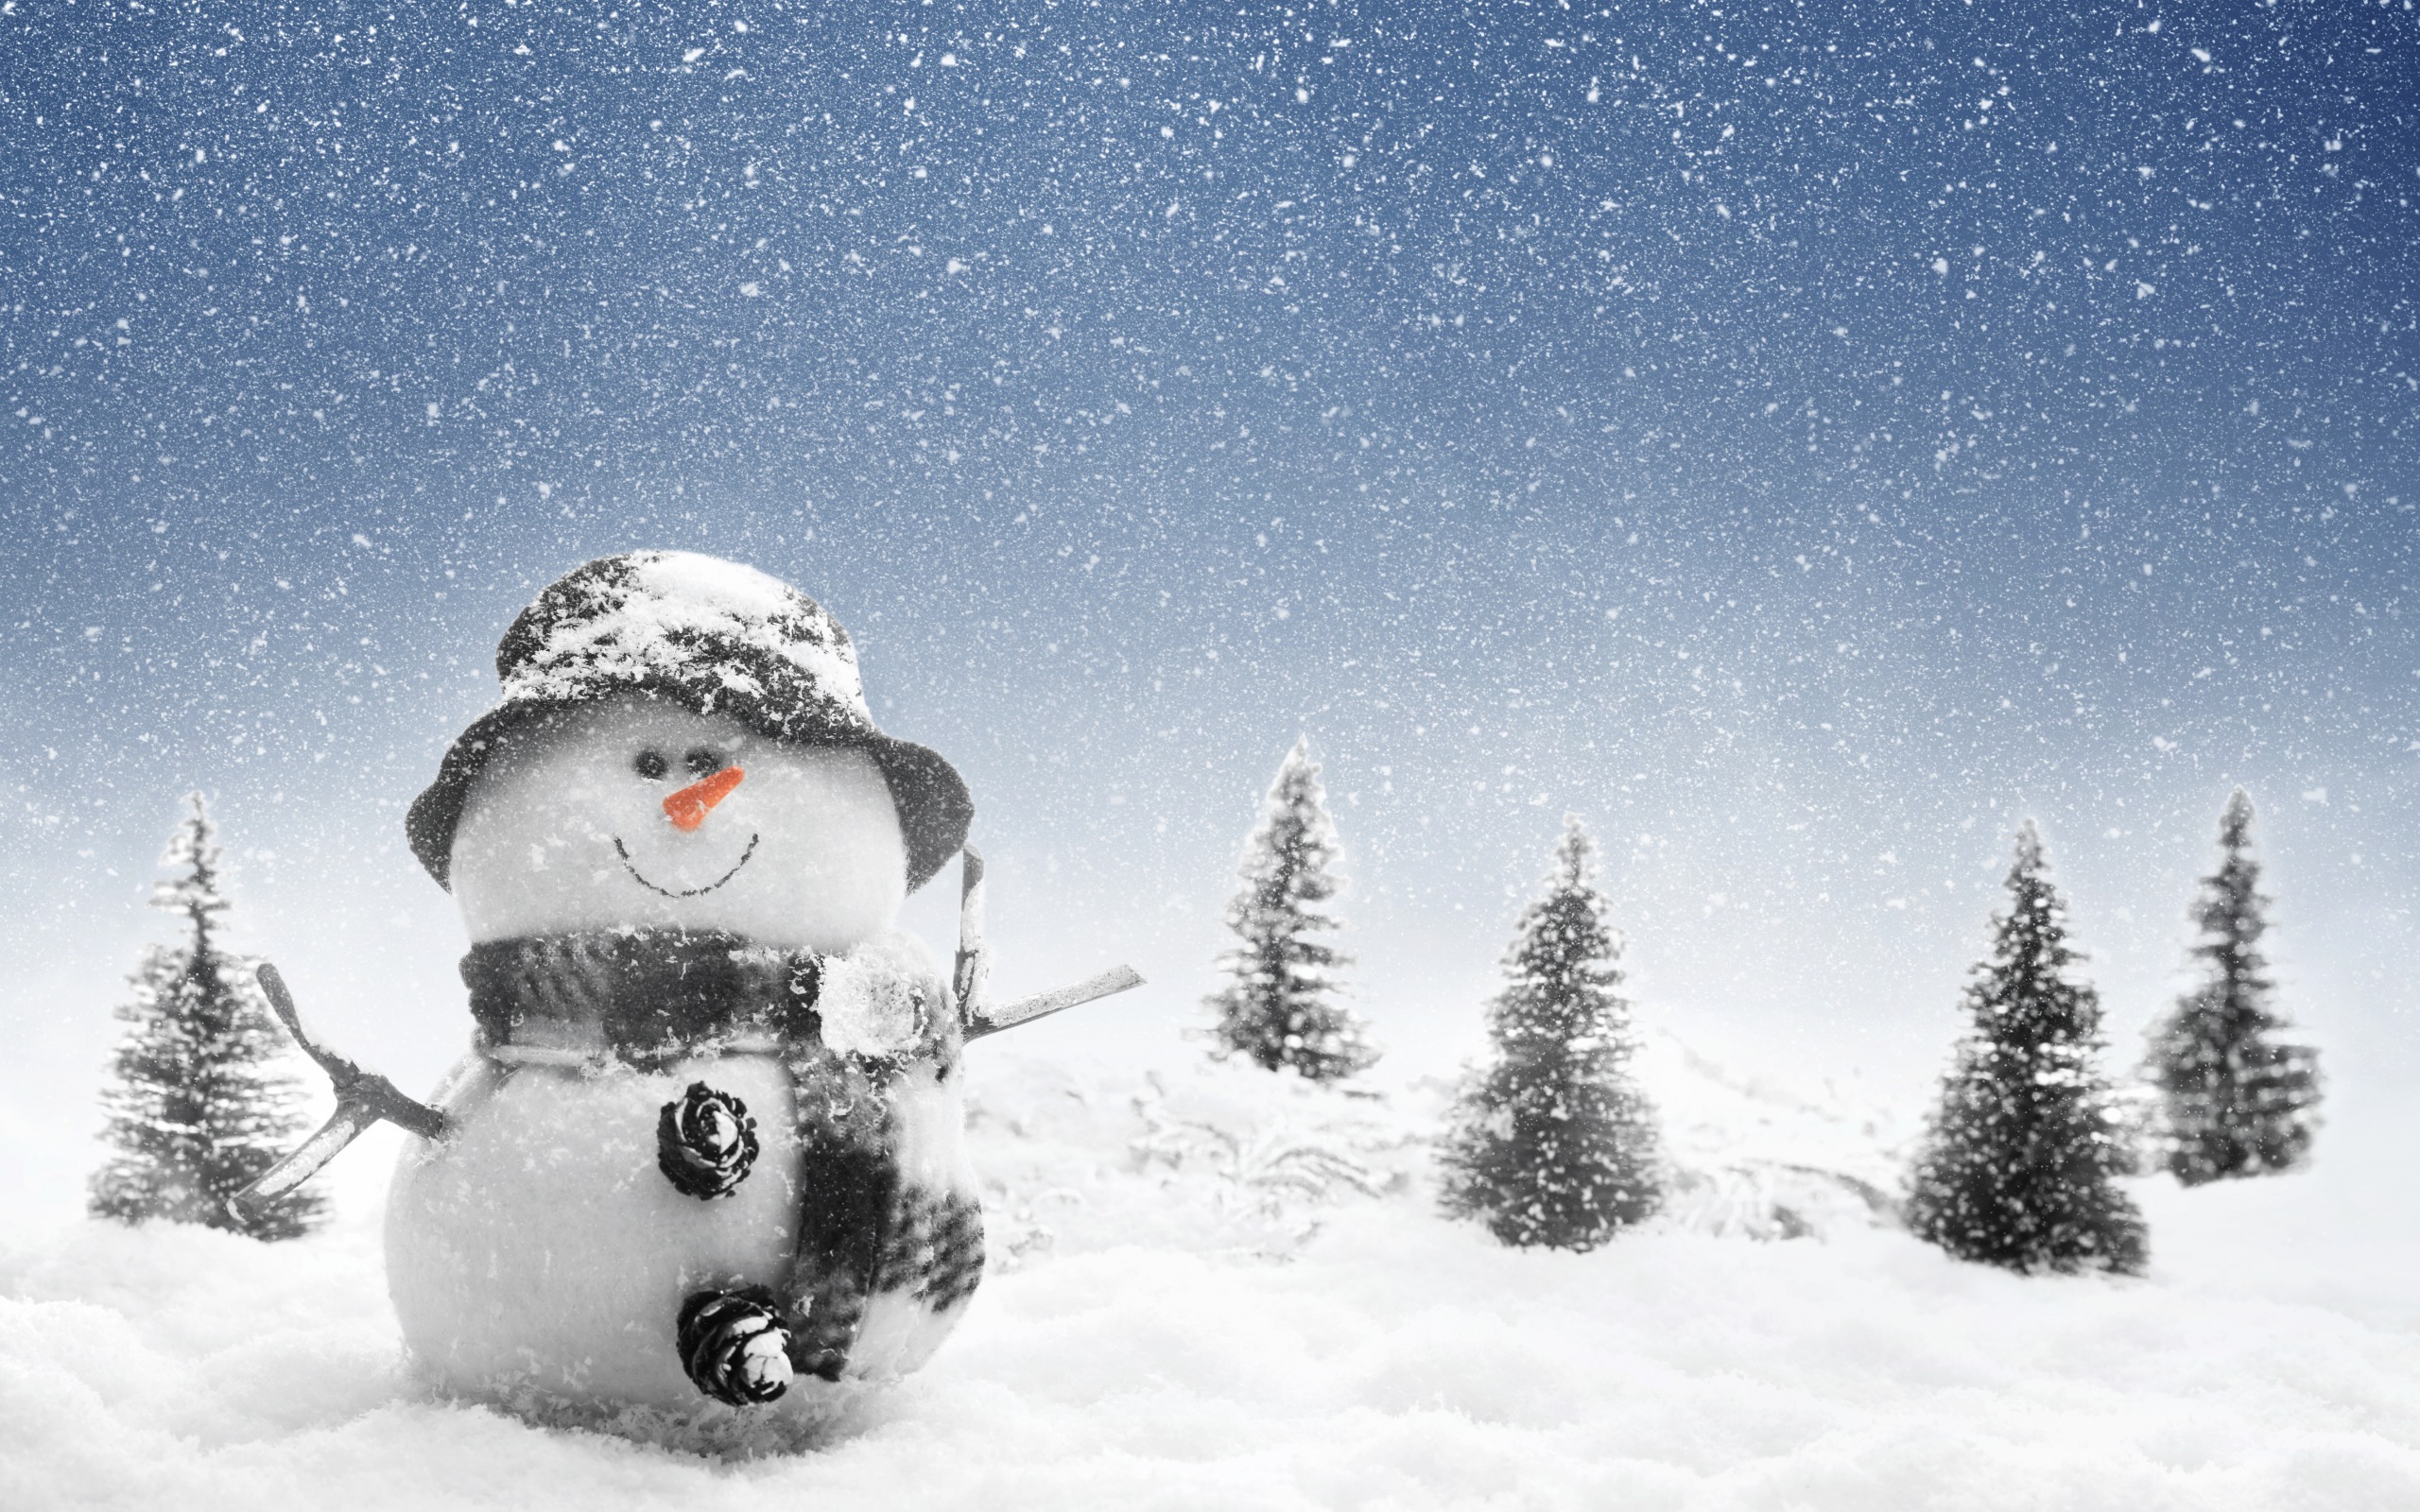 Snowman Wallpaper:Amazon.com:Appstore for Android